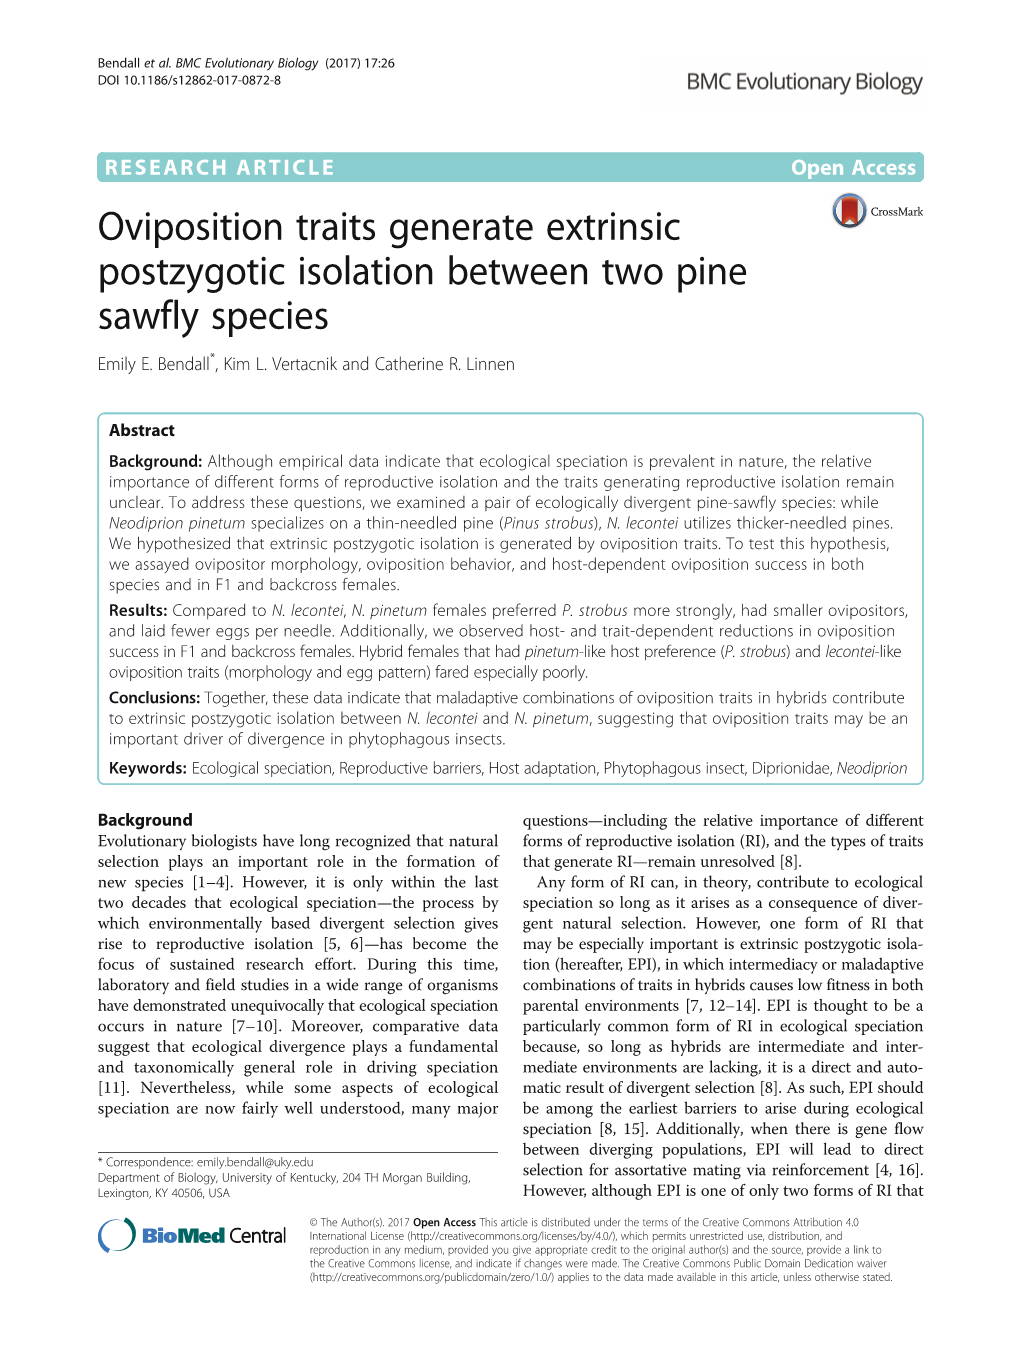 Oviposition Traits Generate Extrinsic Postzygotic Isolation Between Two Pine Sawfly Species Emily E